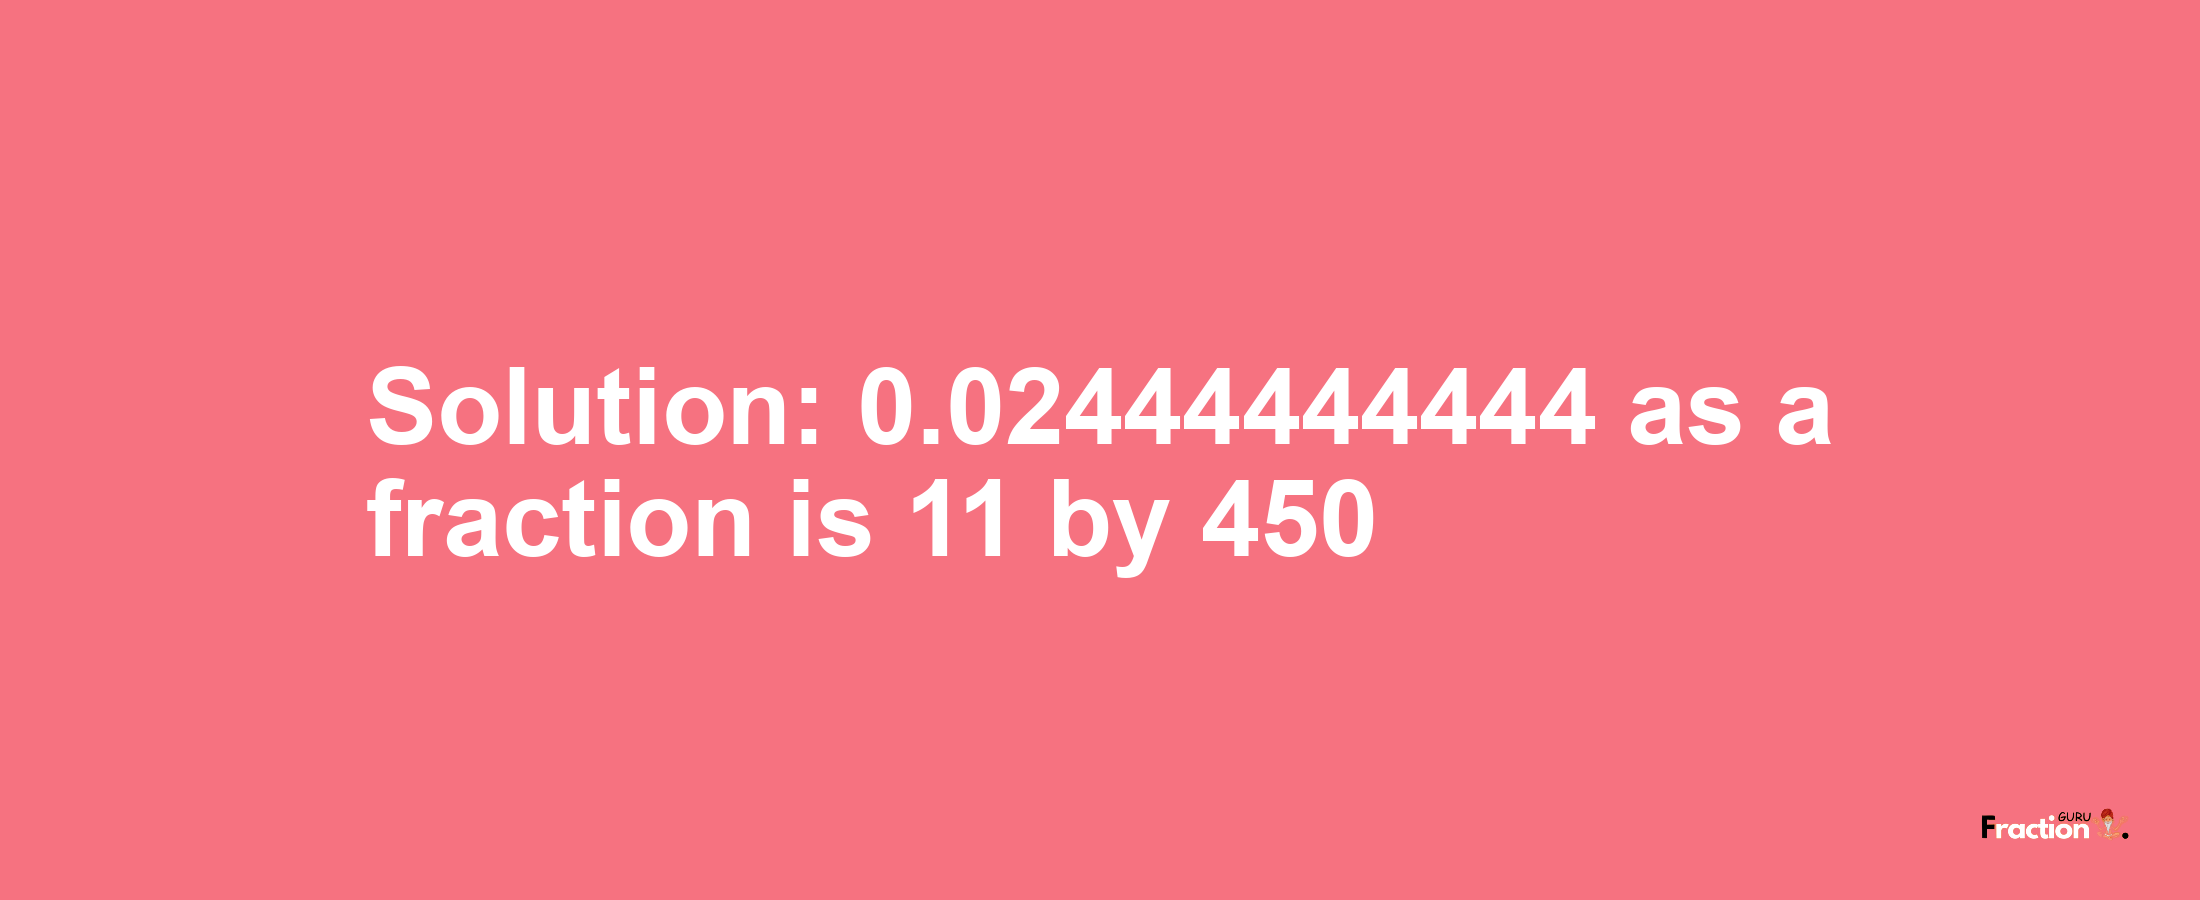 Solution:0.02444444444 as a fraction is 11/450